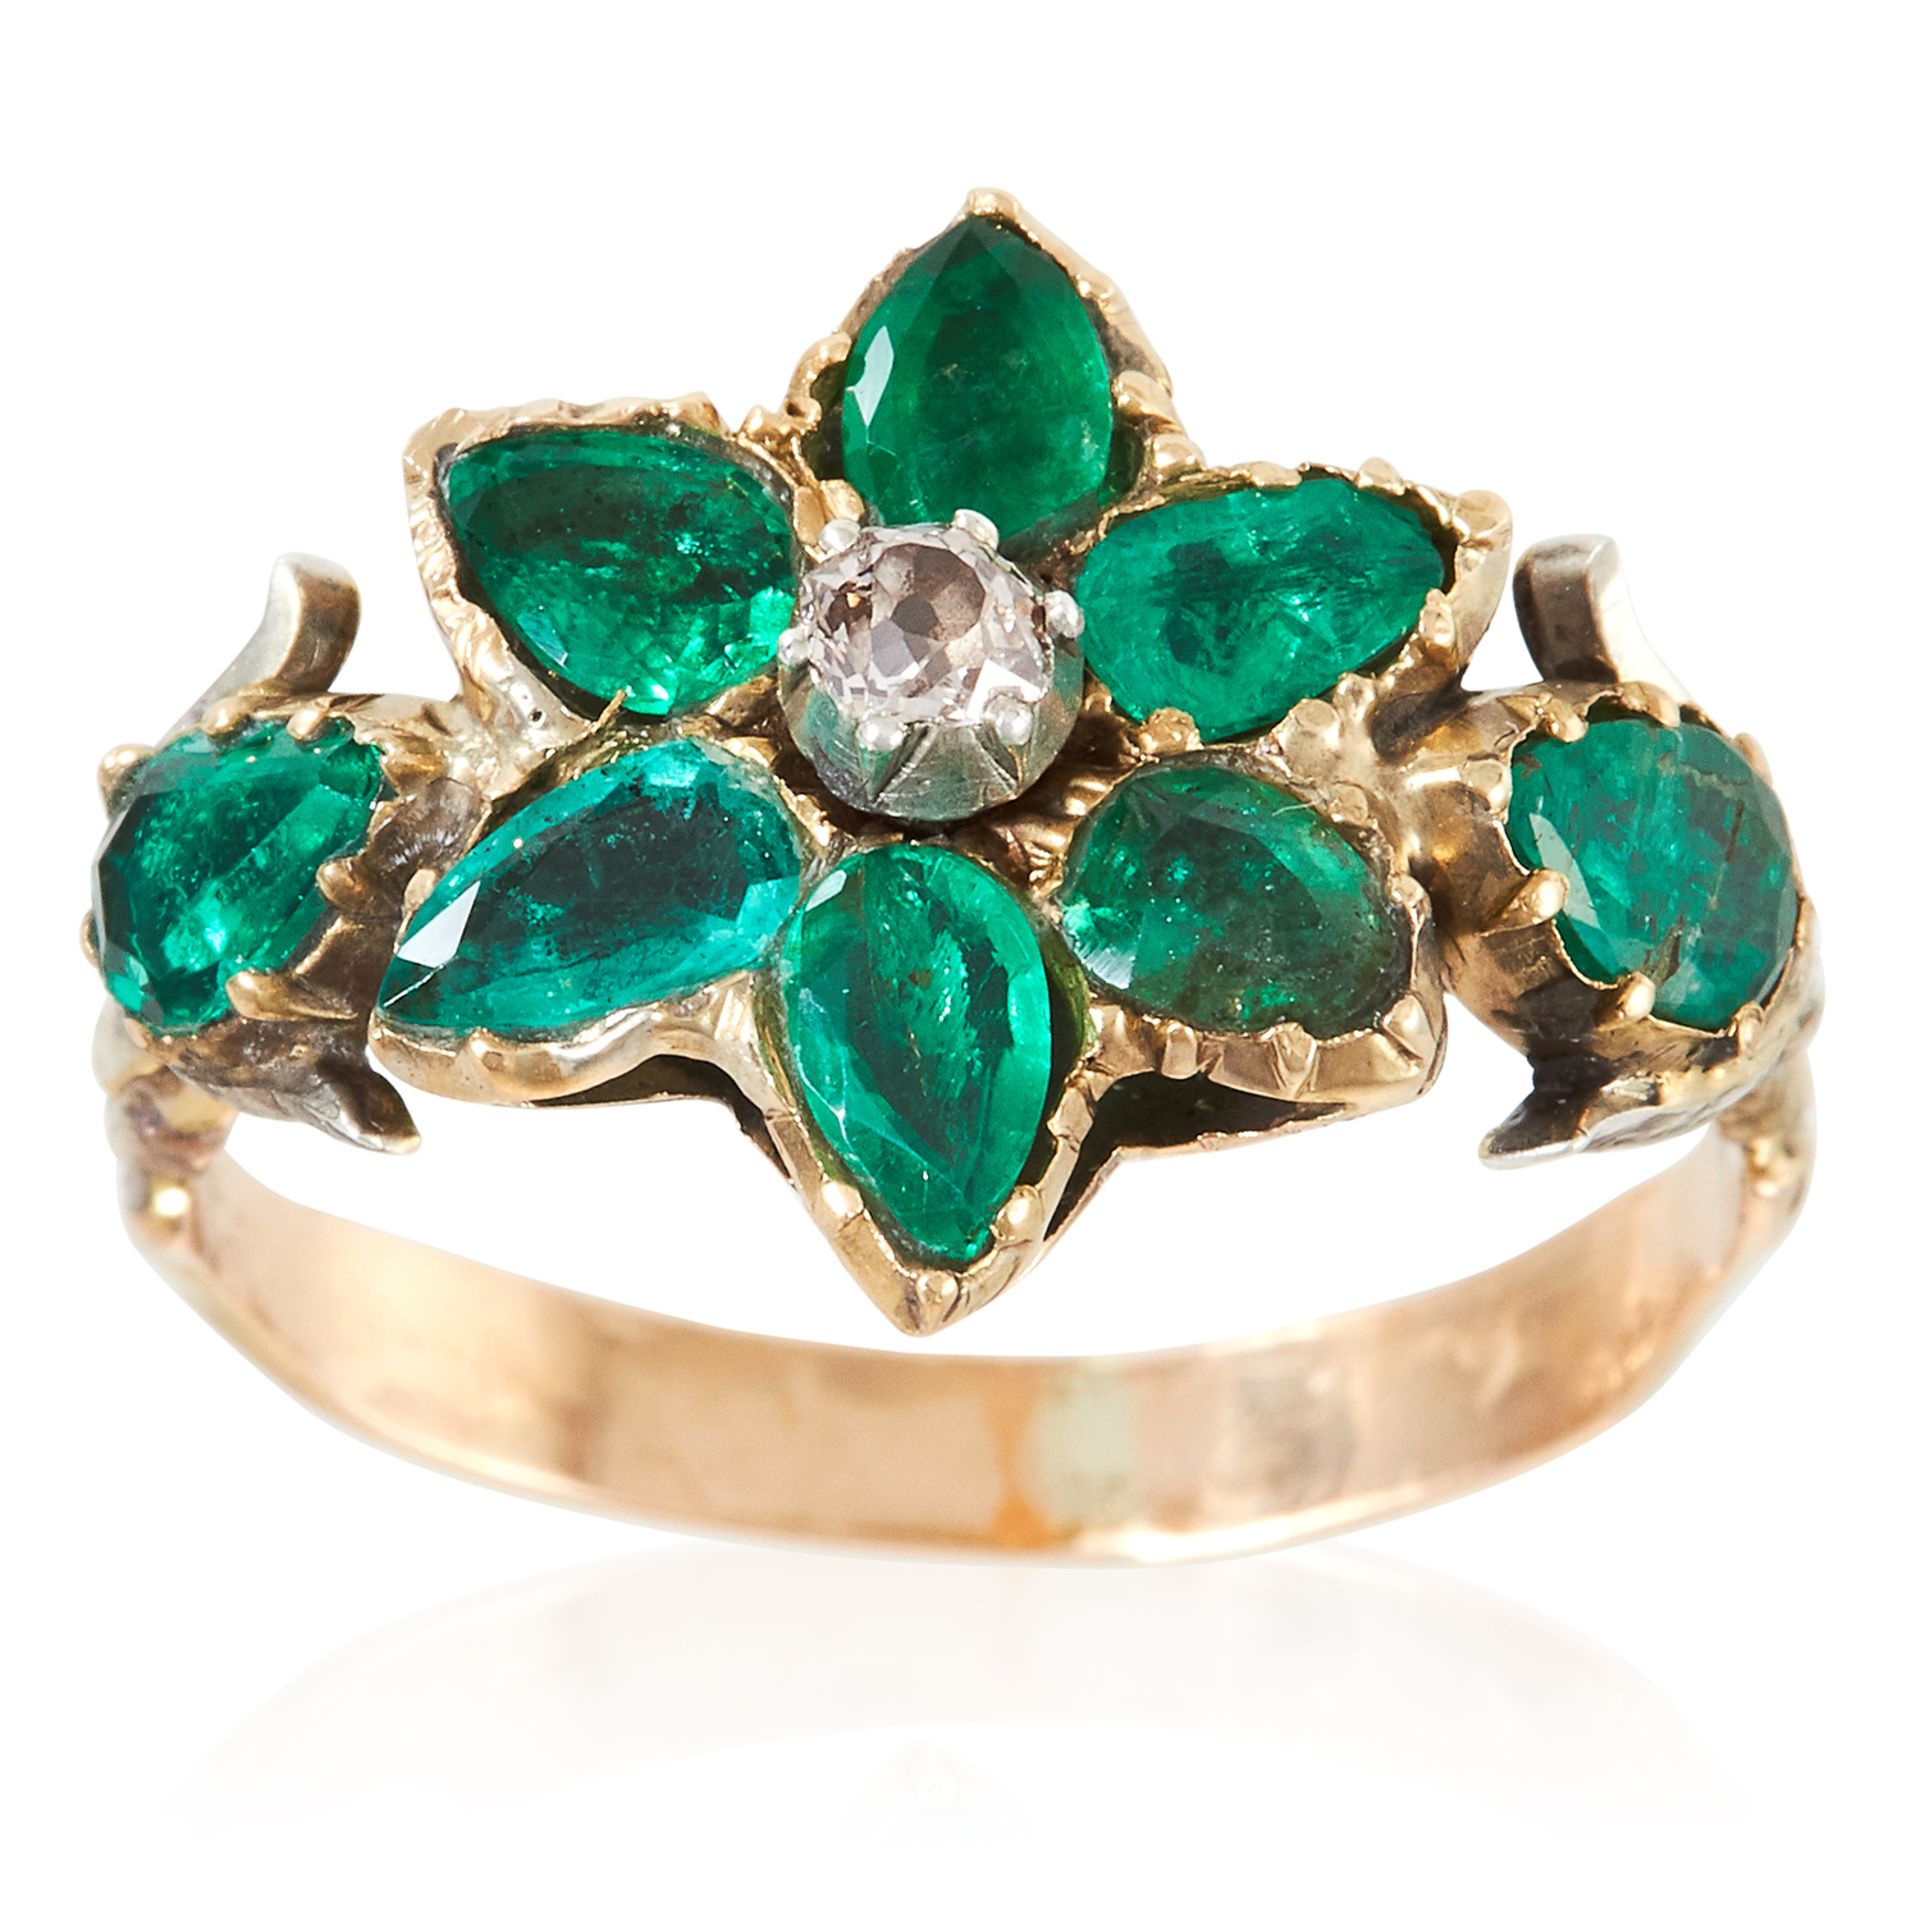 AN ANTIQUE EMERALD AND DIAMOND RING, 19TH CENTURY in high carat yellow gold, the floral motif